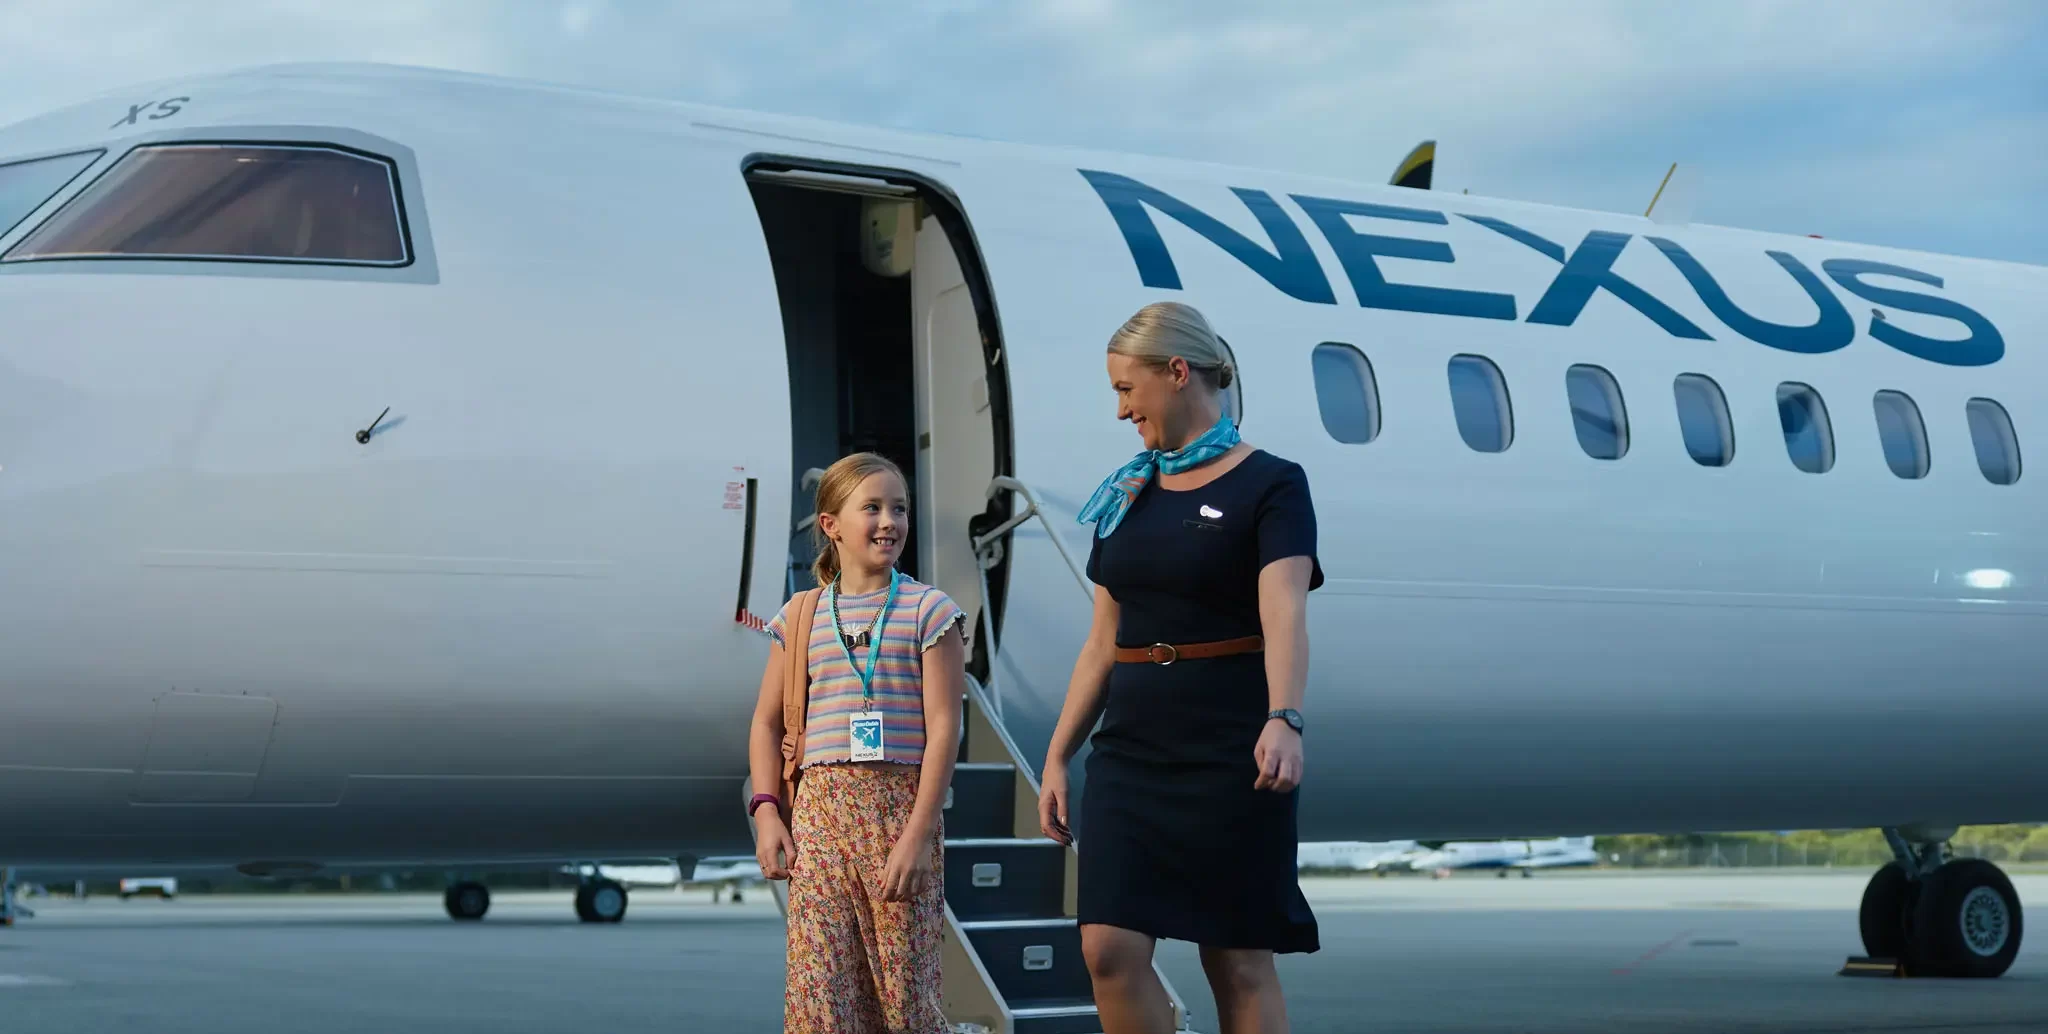 Flight hostess smiling at a young girl in front of a Nexus Airlines airplane